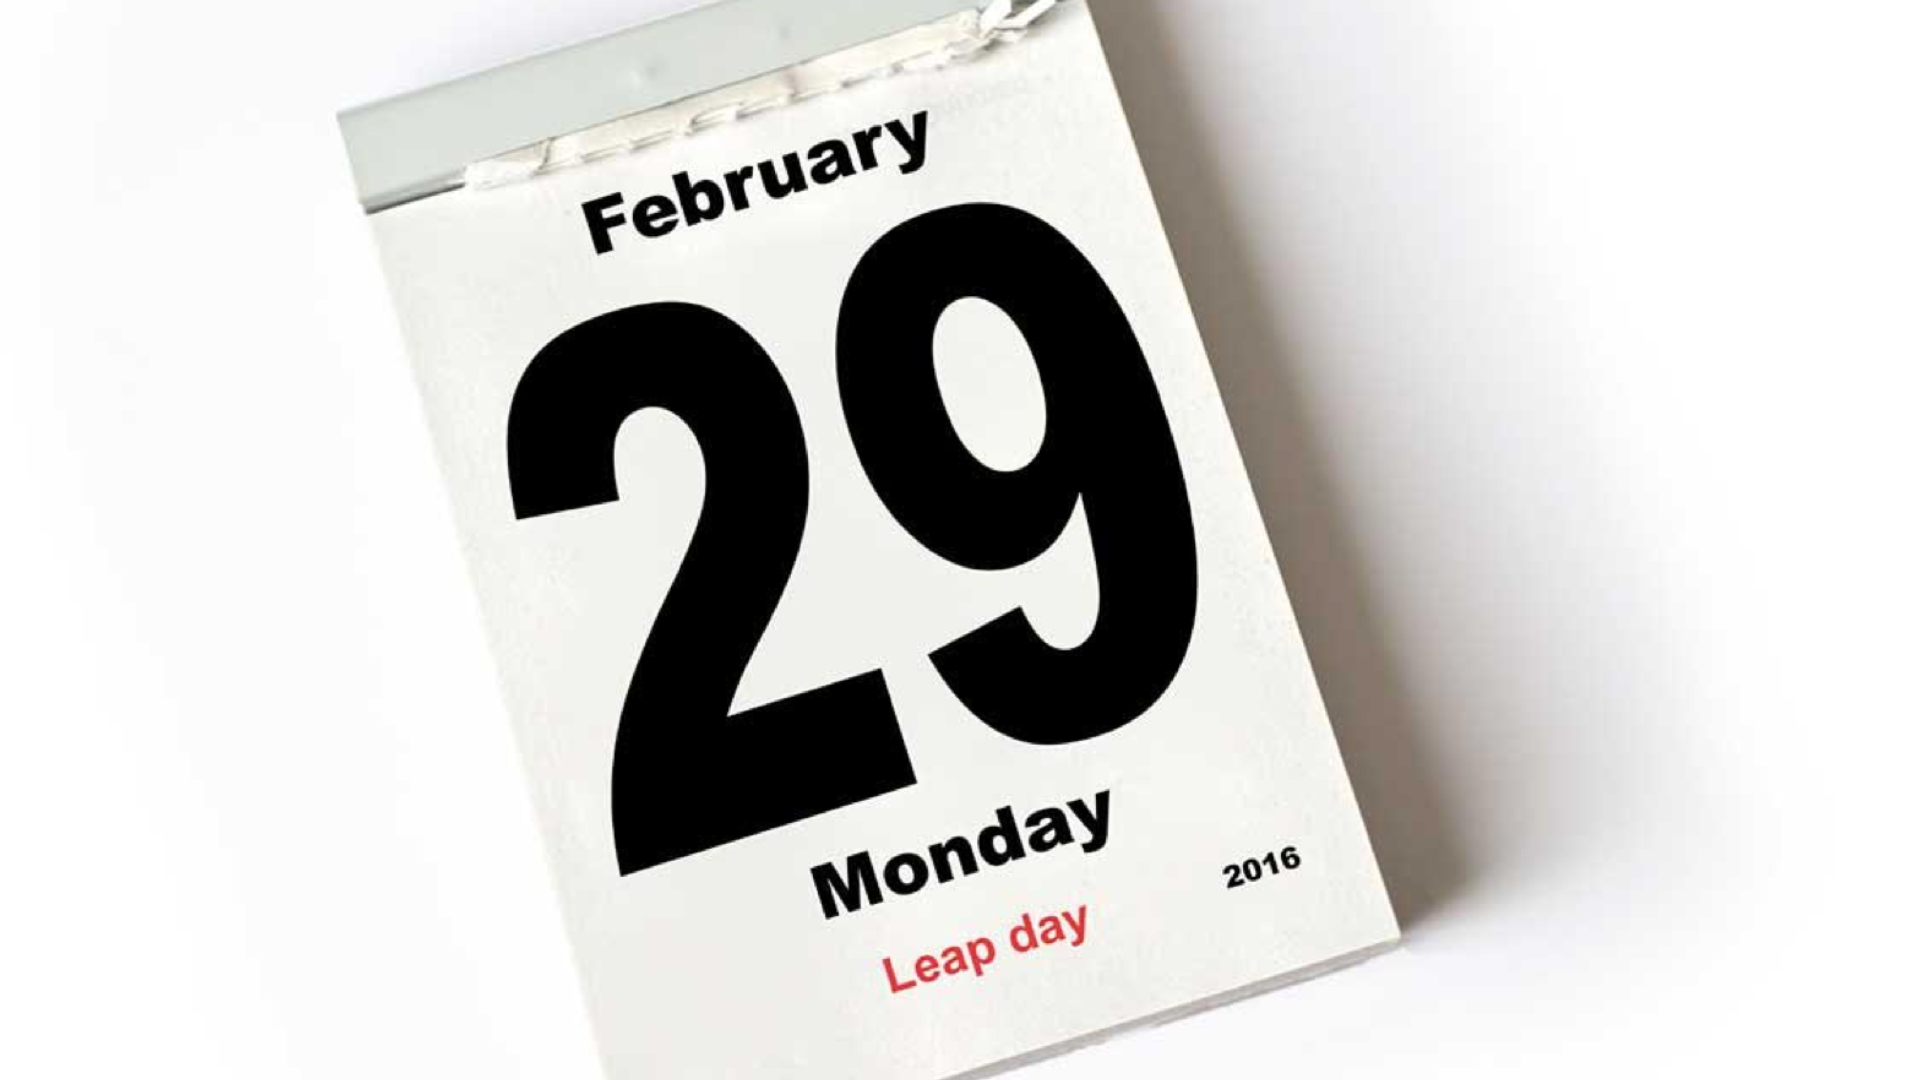 This Saturday Feb. 29 is Leap Day. It's a day that only comes every four years, and the reasoning behind it is actually pretty complex.